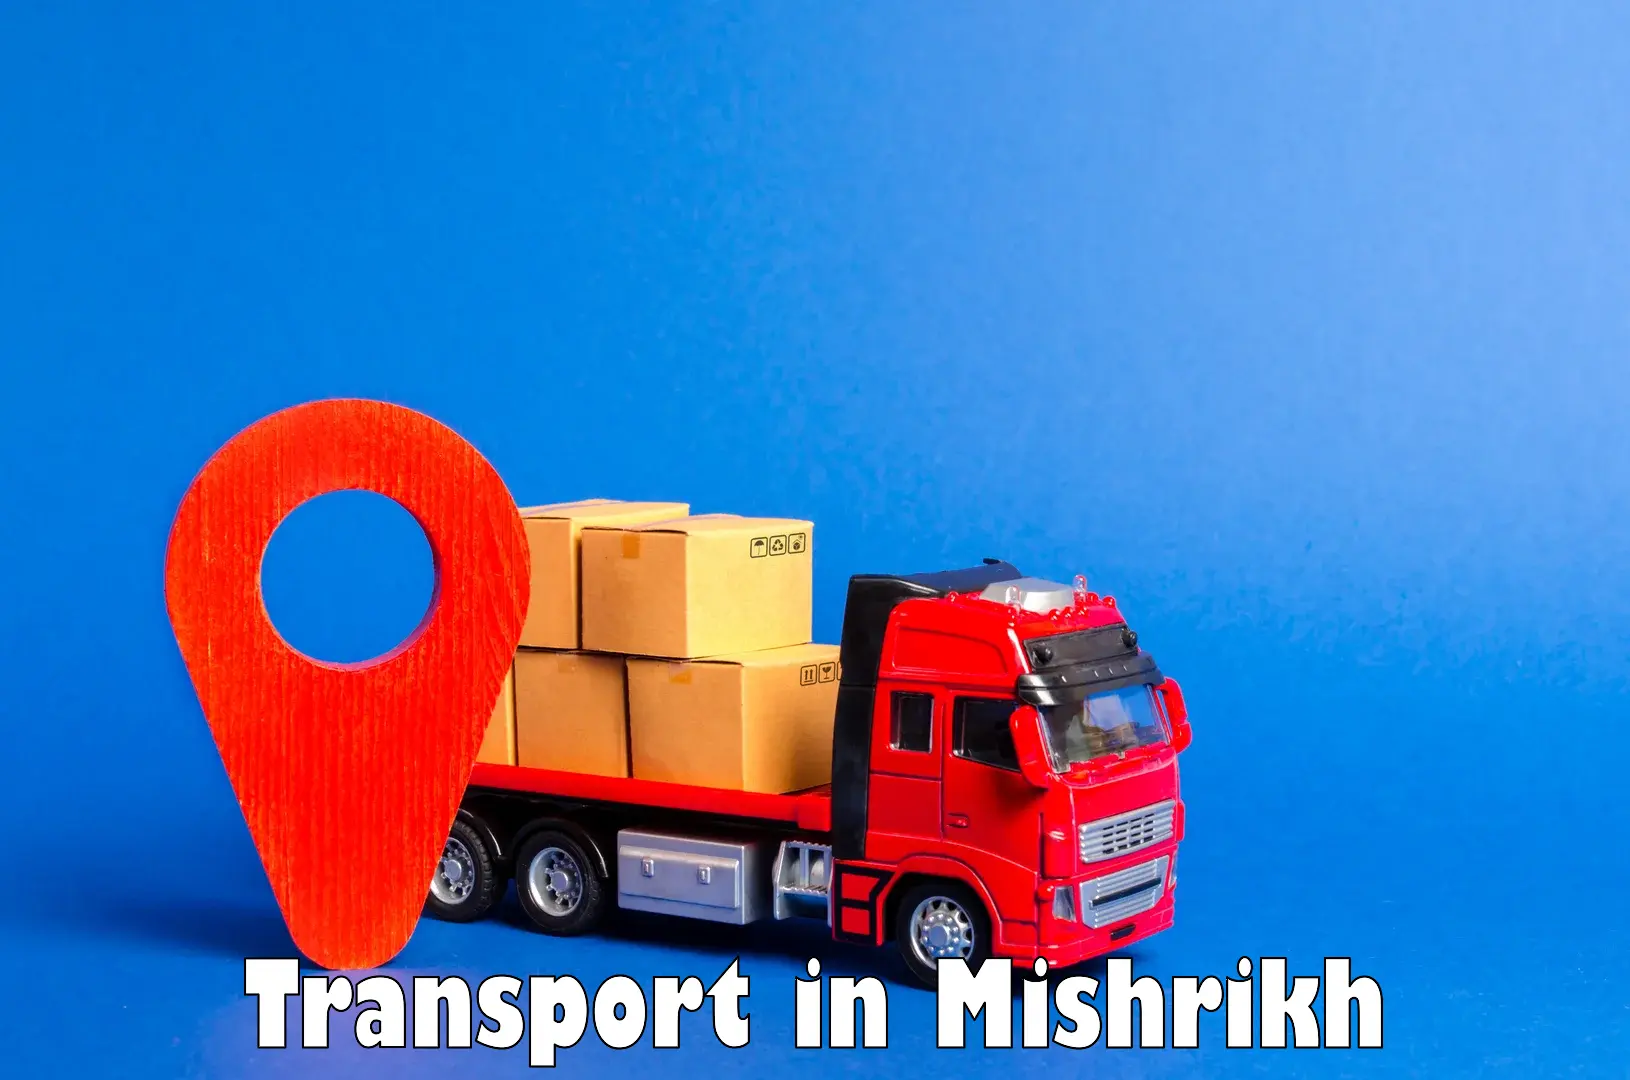 Shipping services in Mishrikh